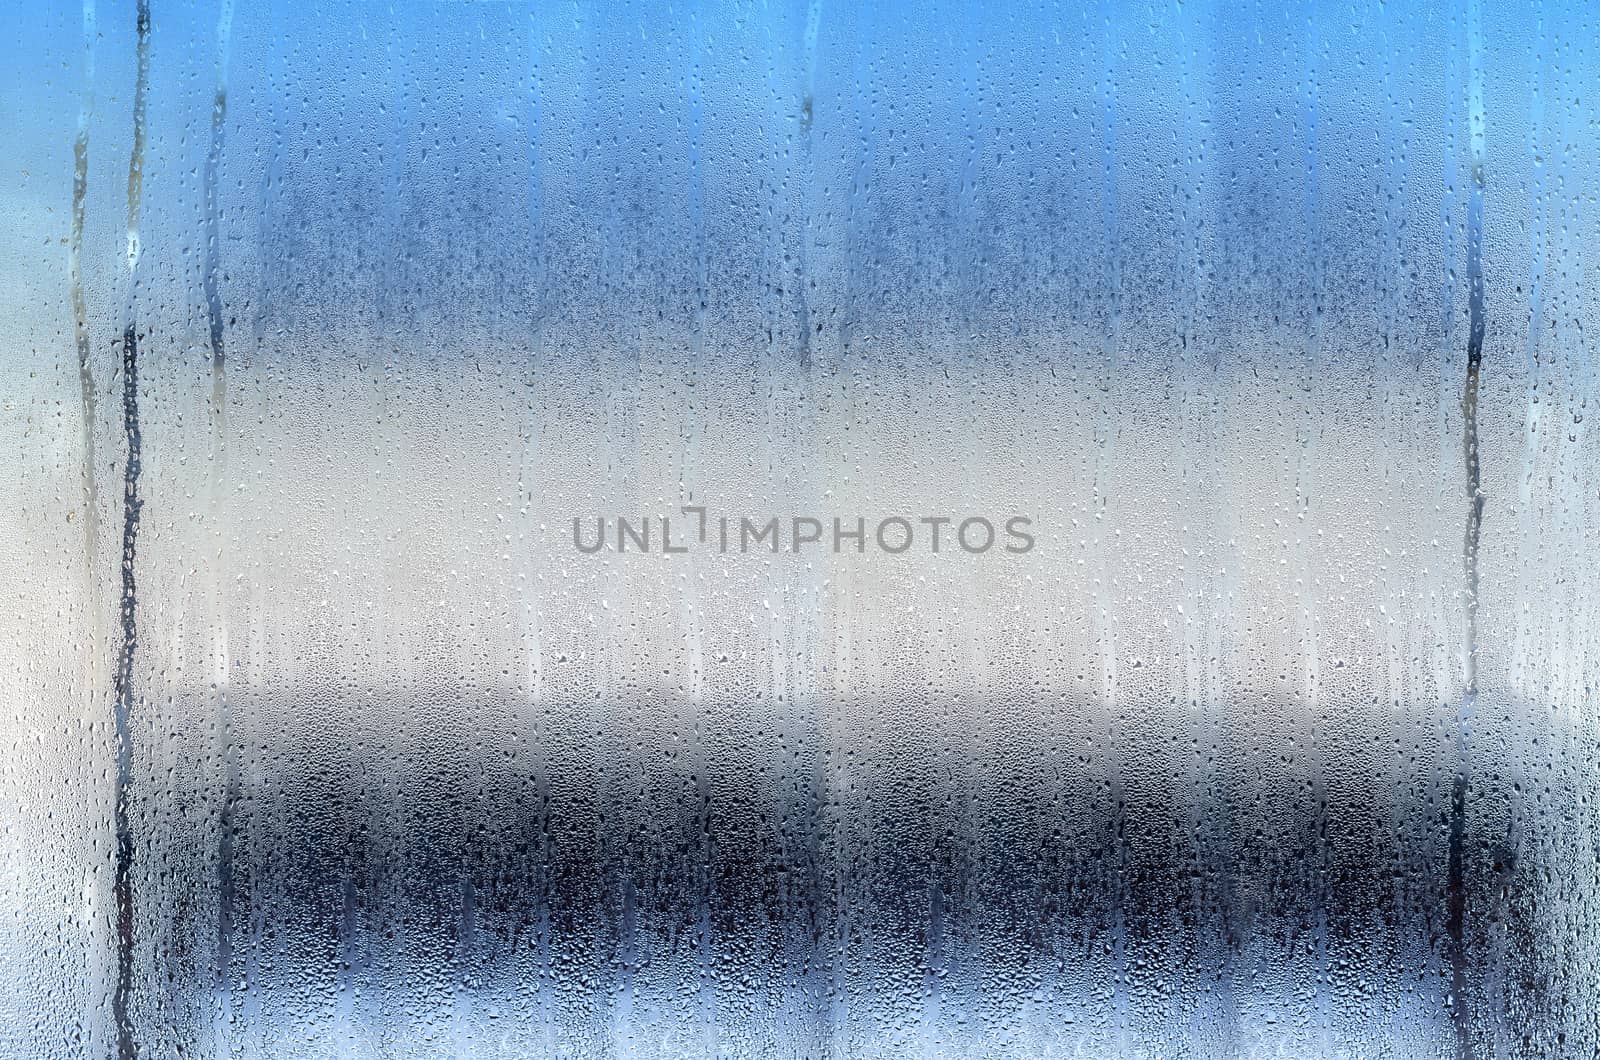 Tricolor texture background with drops on the glass. Plenty of space for text.